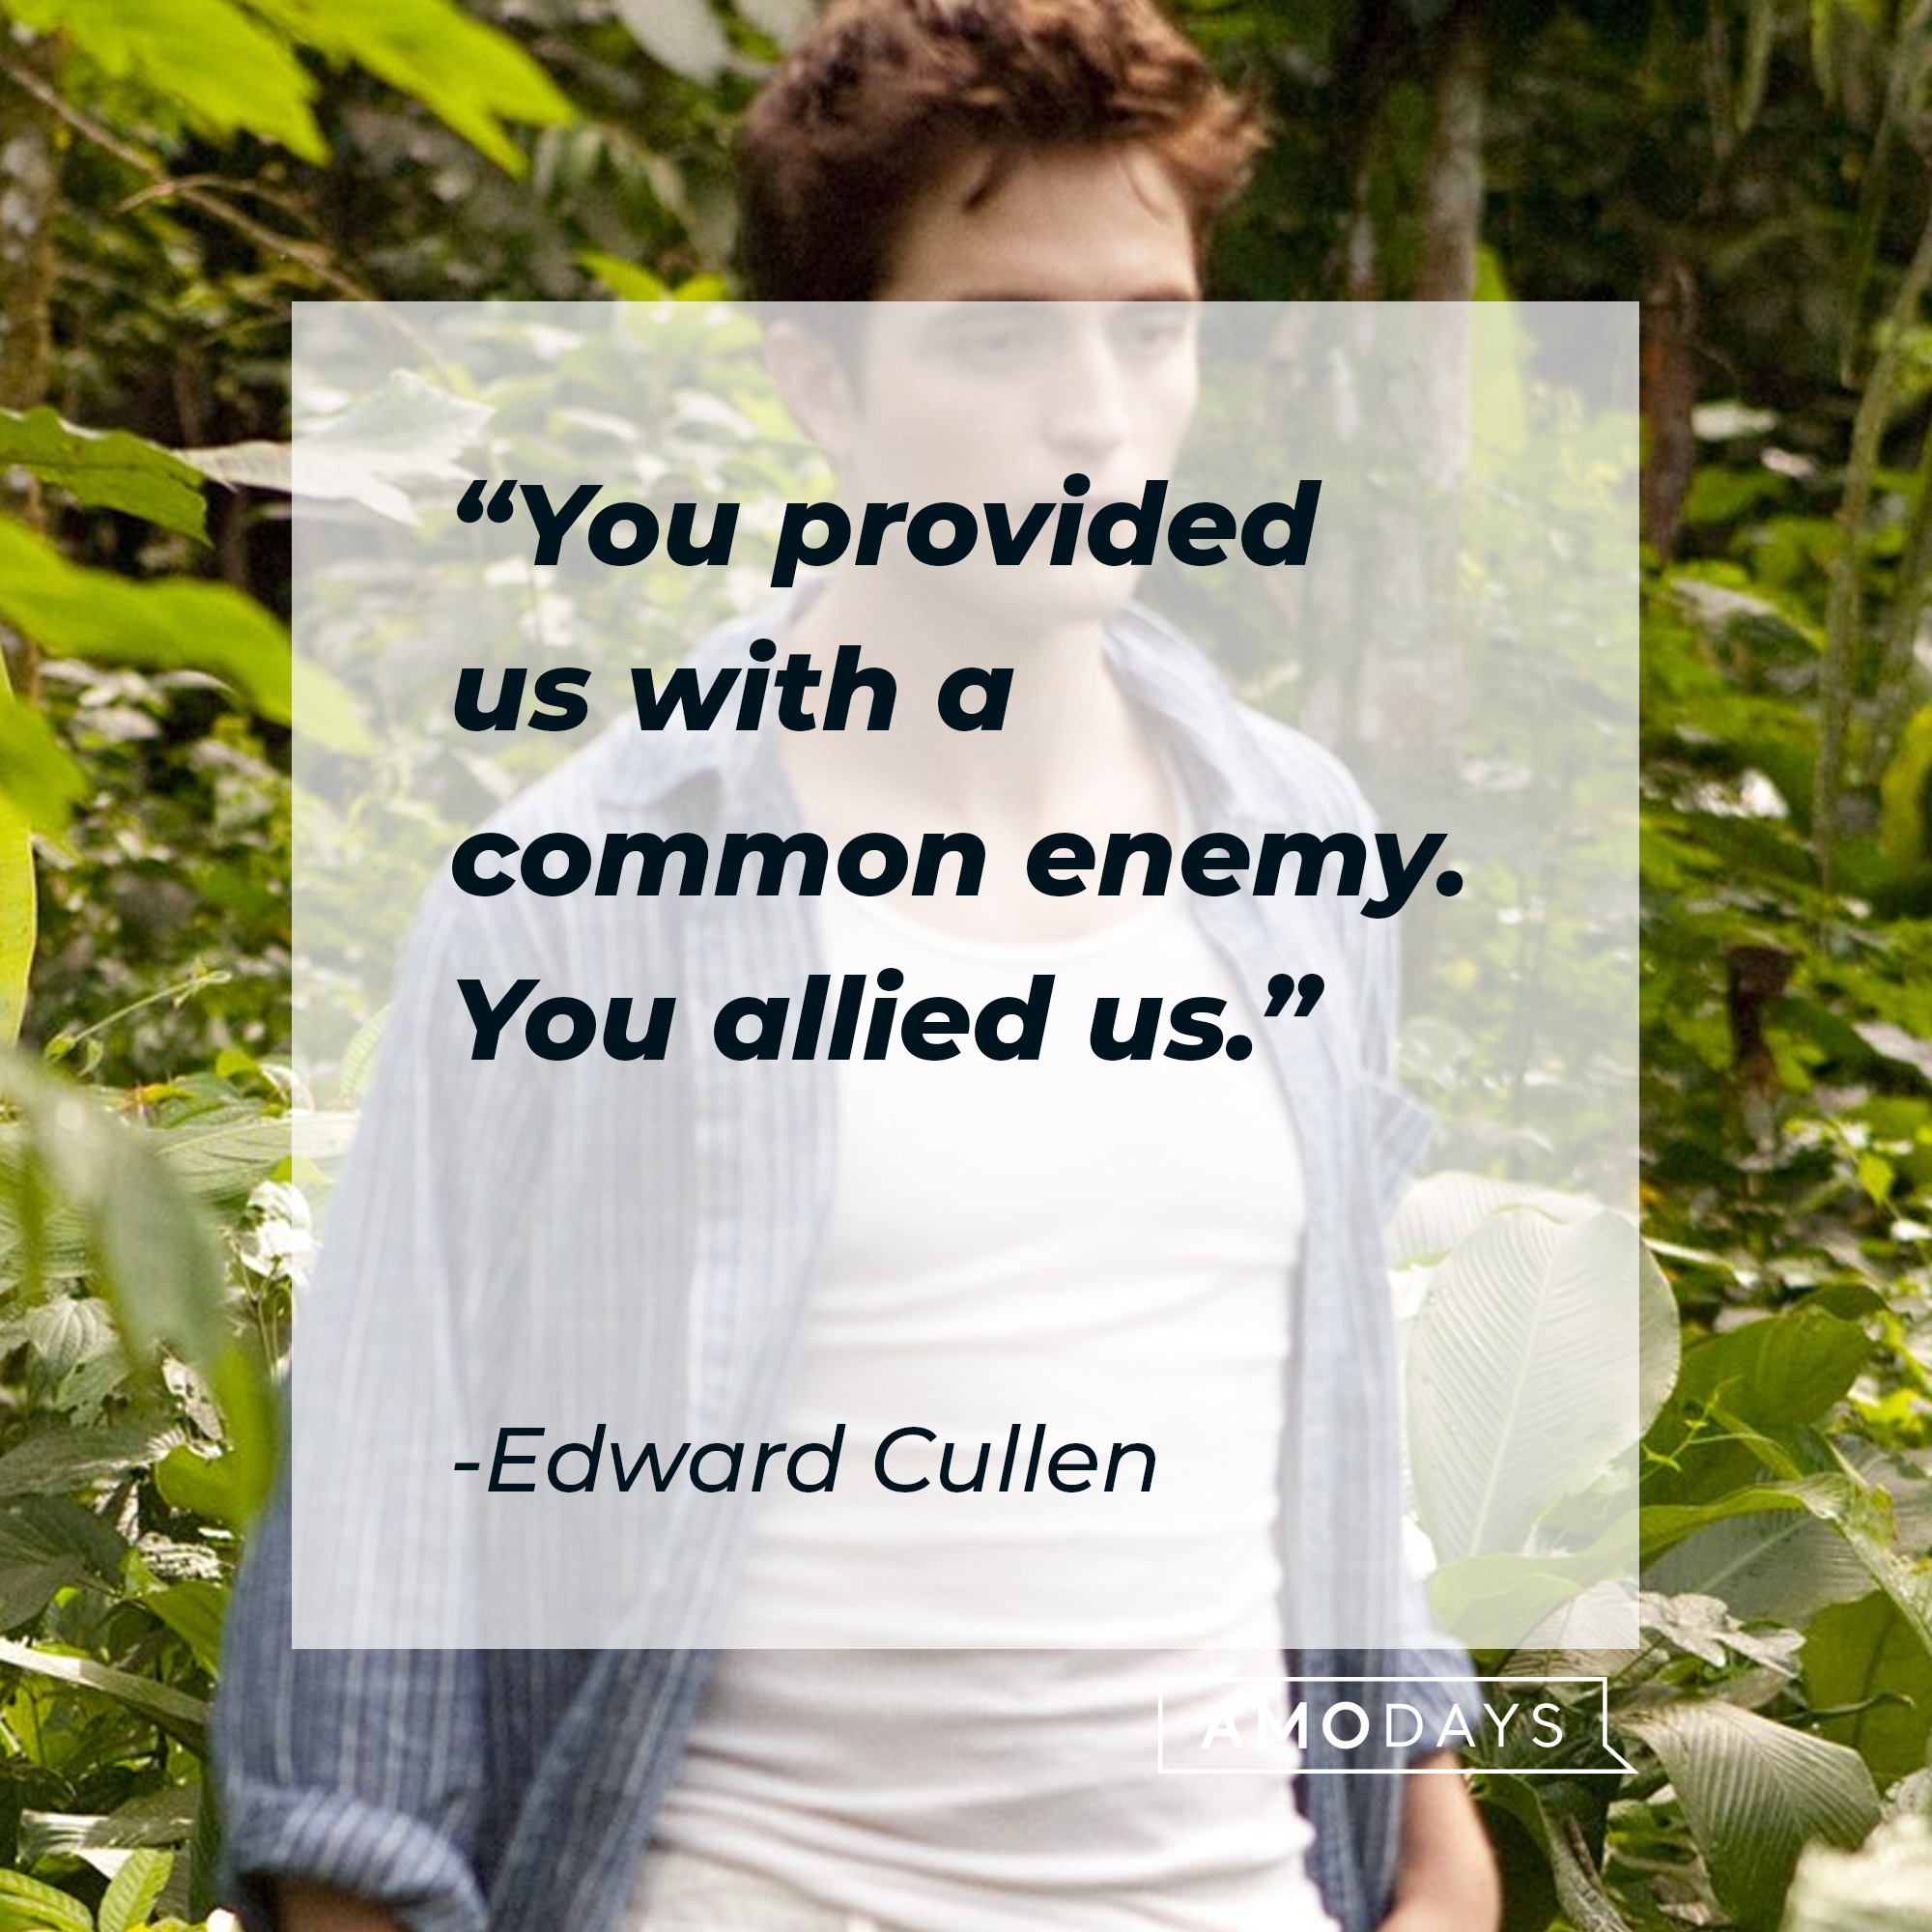 An image of Edward Cullen with his quote: “You provided us with a common enemy. You allied us.” | Source: Facebook.com/twilight